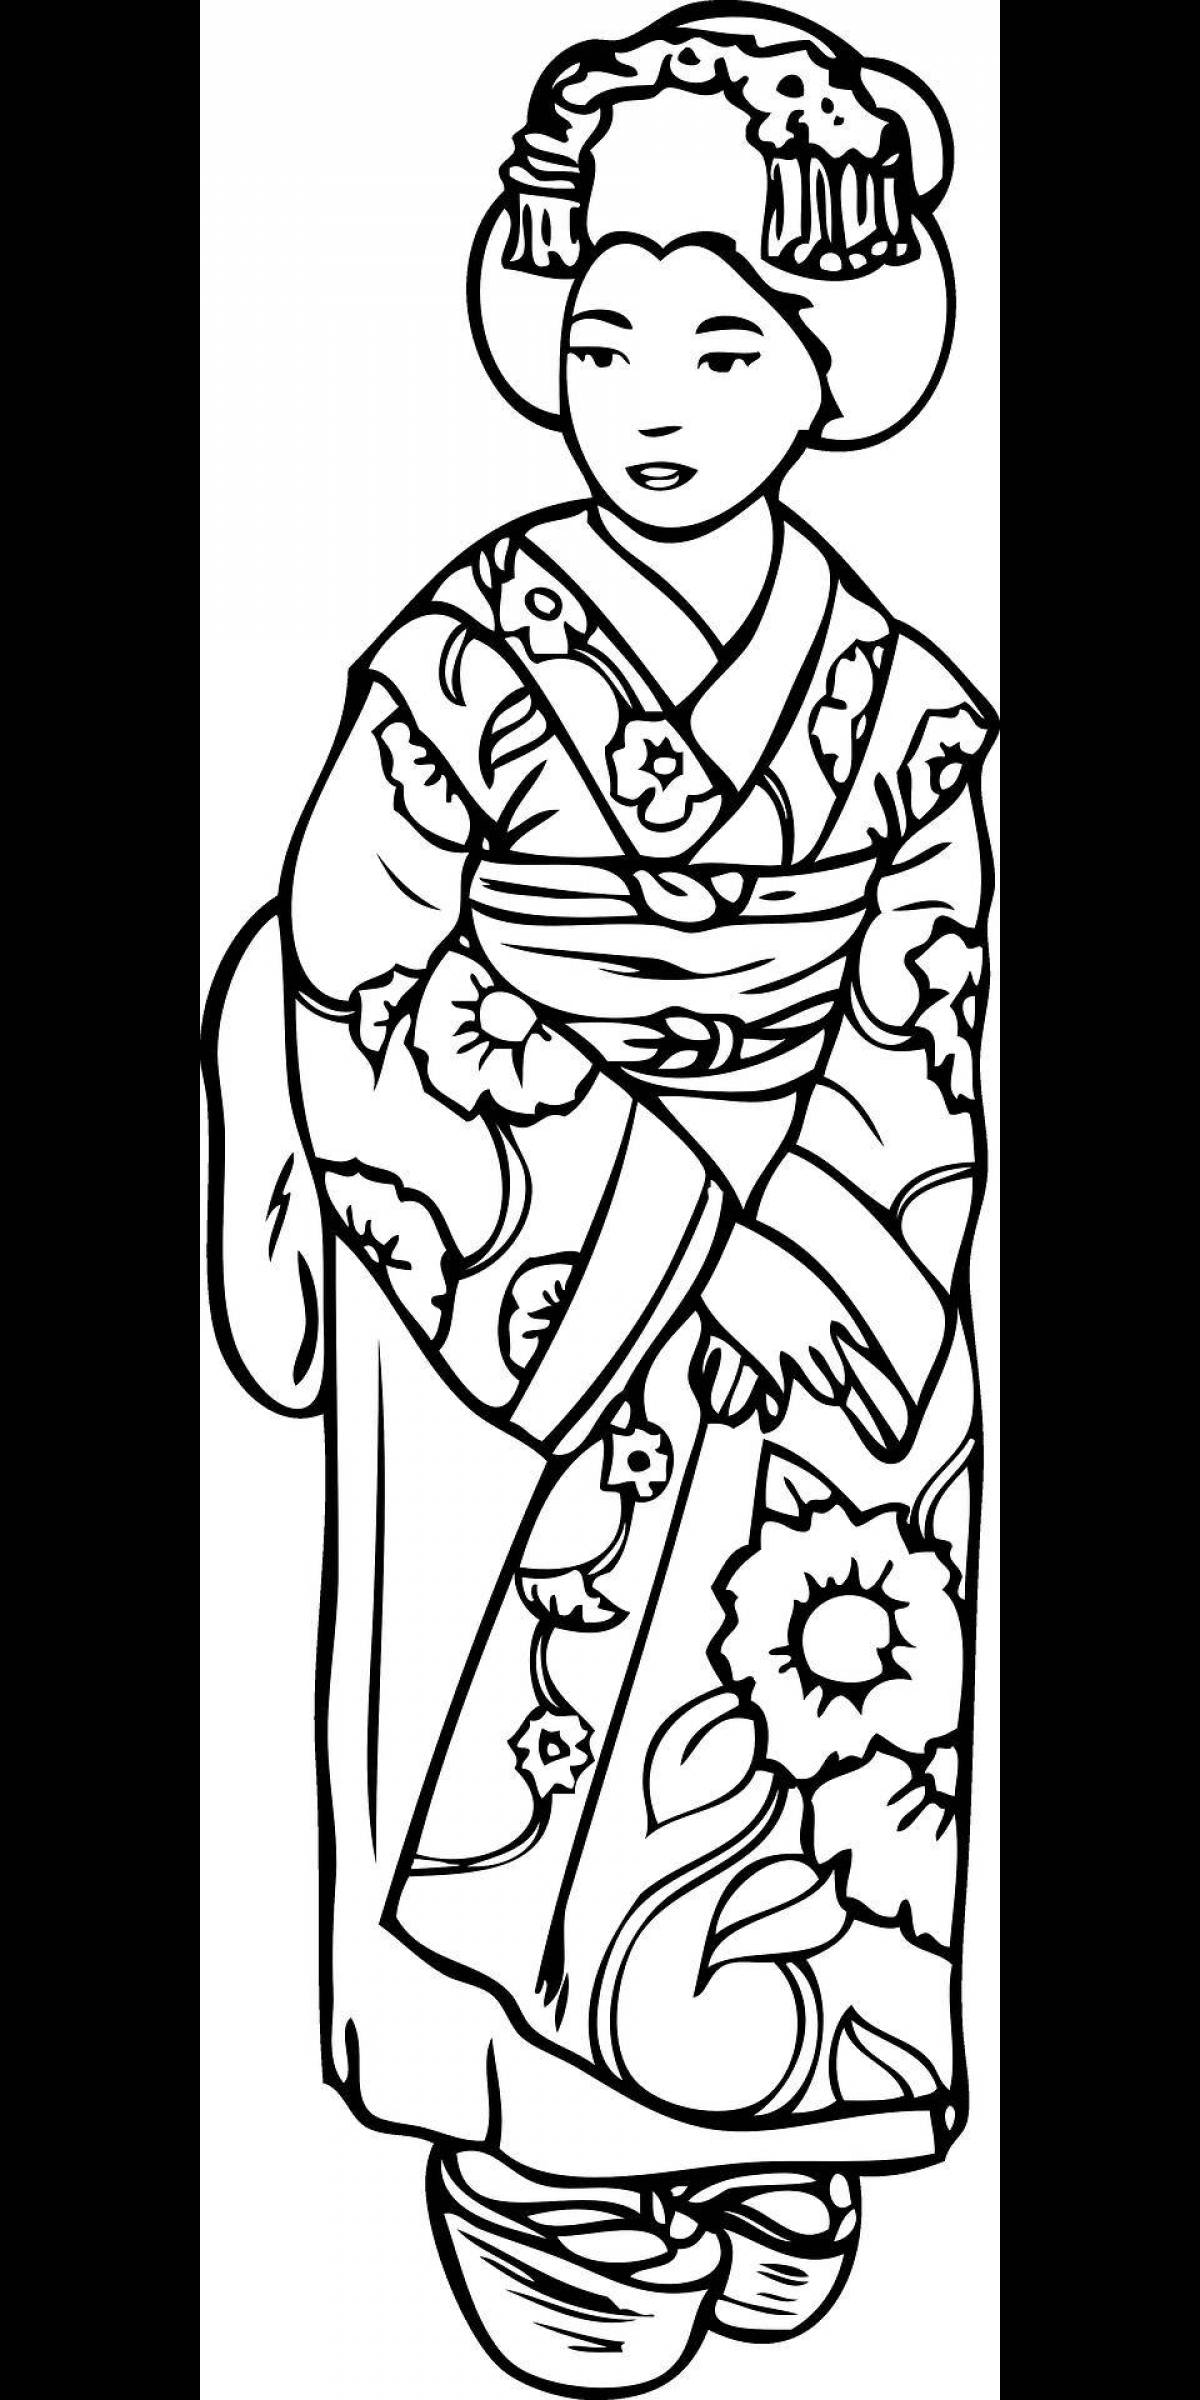 Colorful Chinese costume coloring book